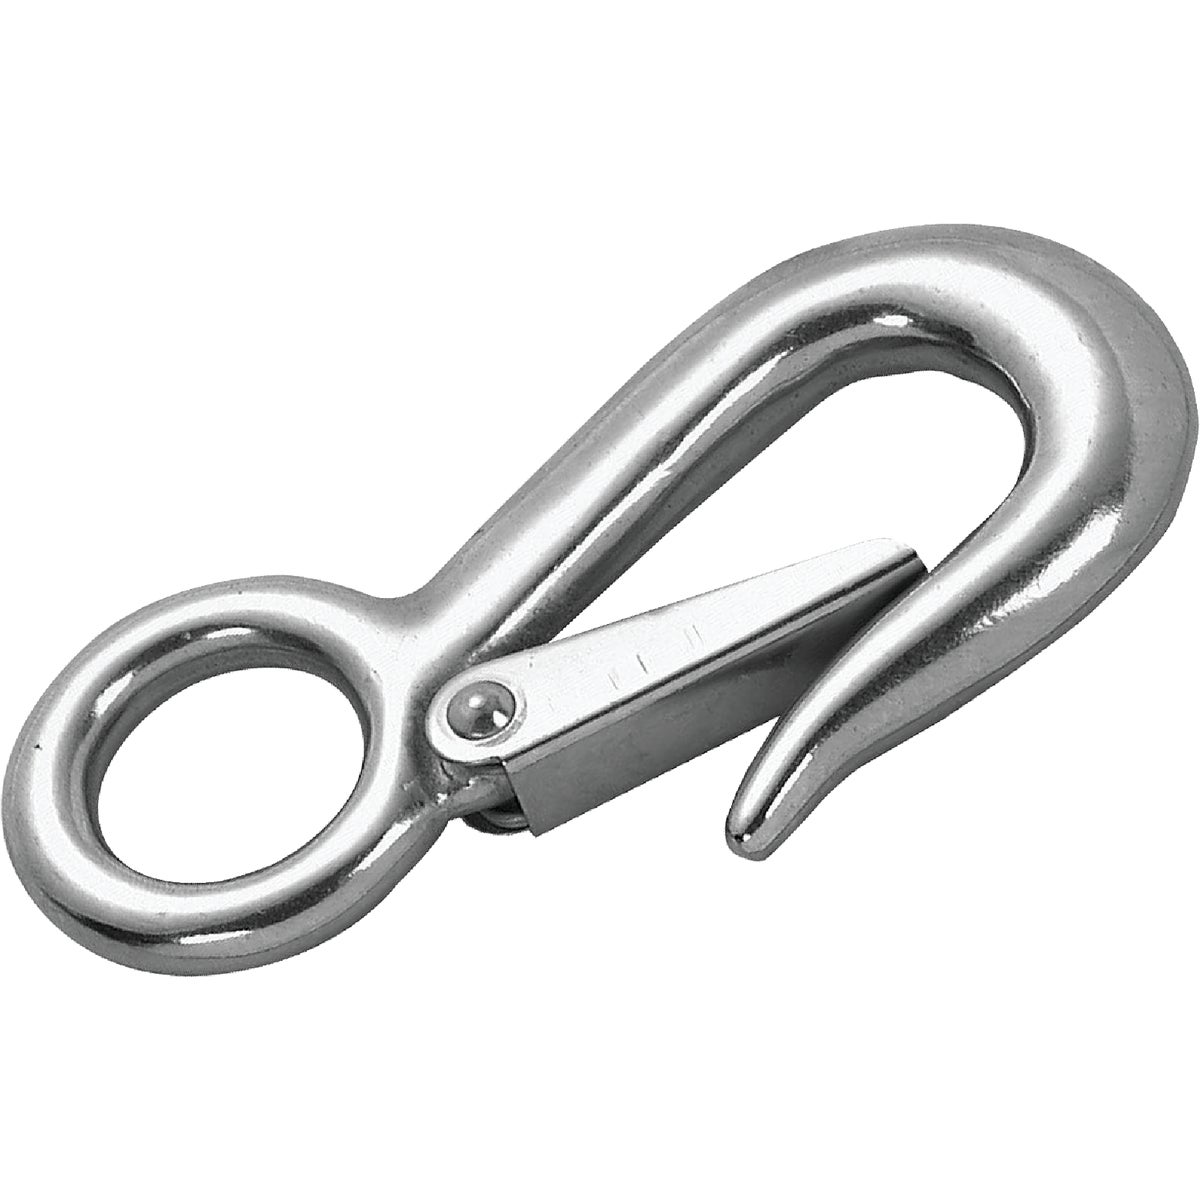 Item 769716, Rugged stainless steel snap hook ideal for a wide variety of applications.